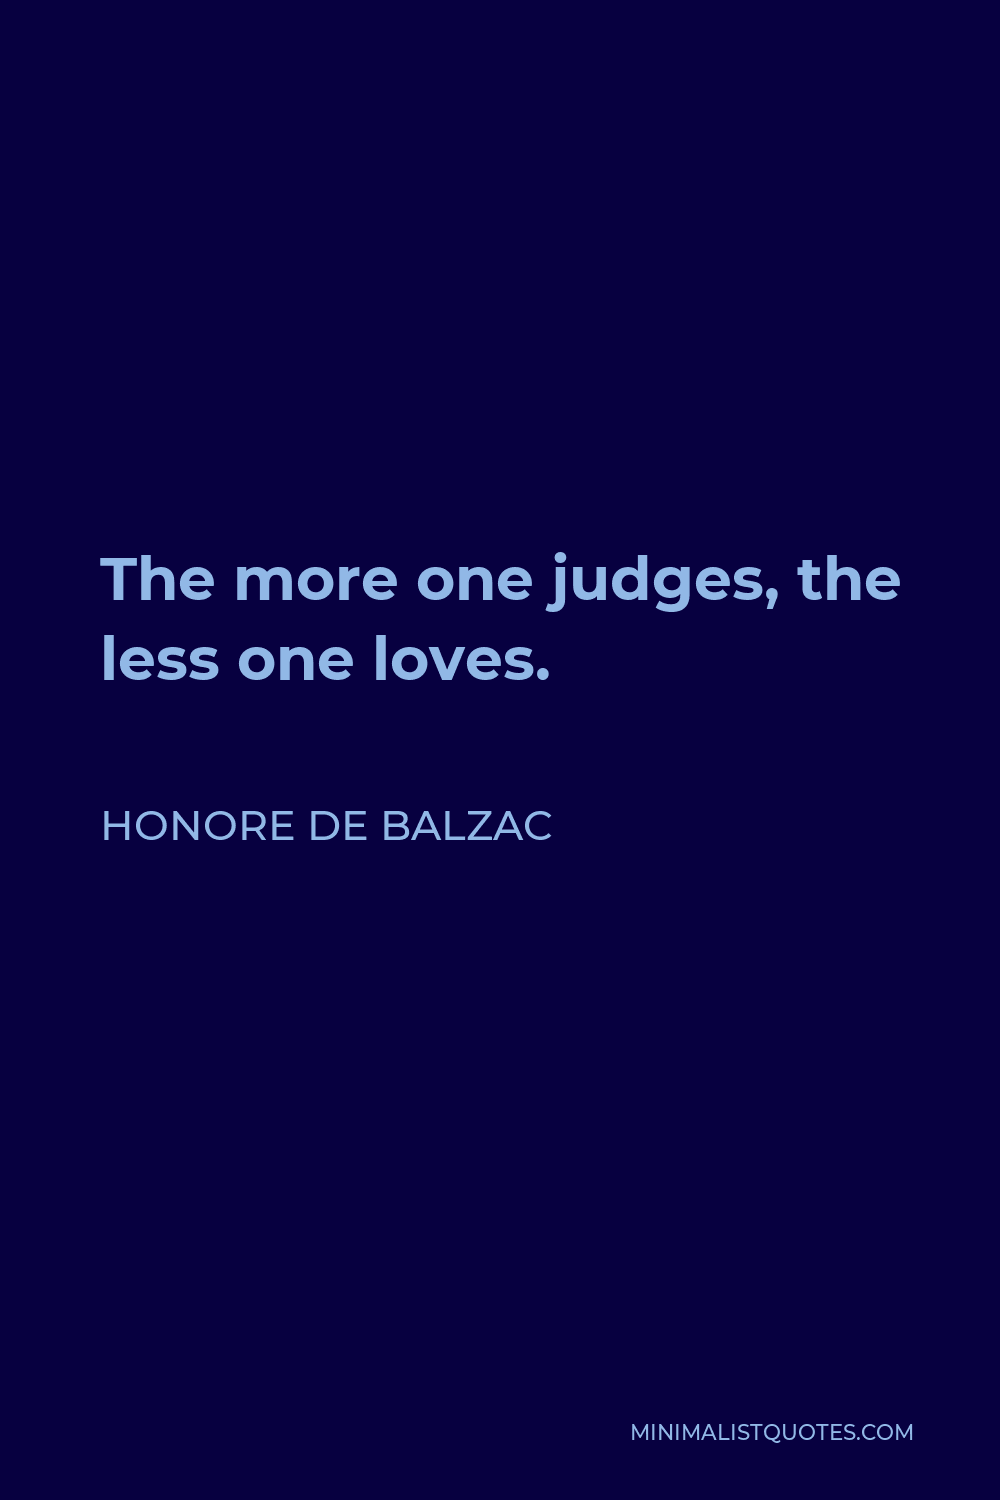 Honore de Balzac Quote - The more one judges, the less one loves.